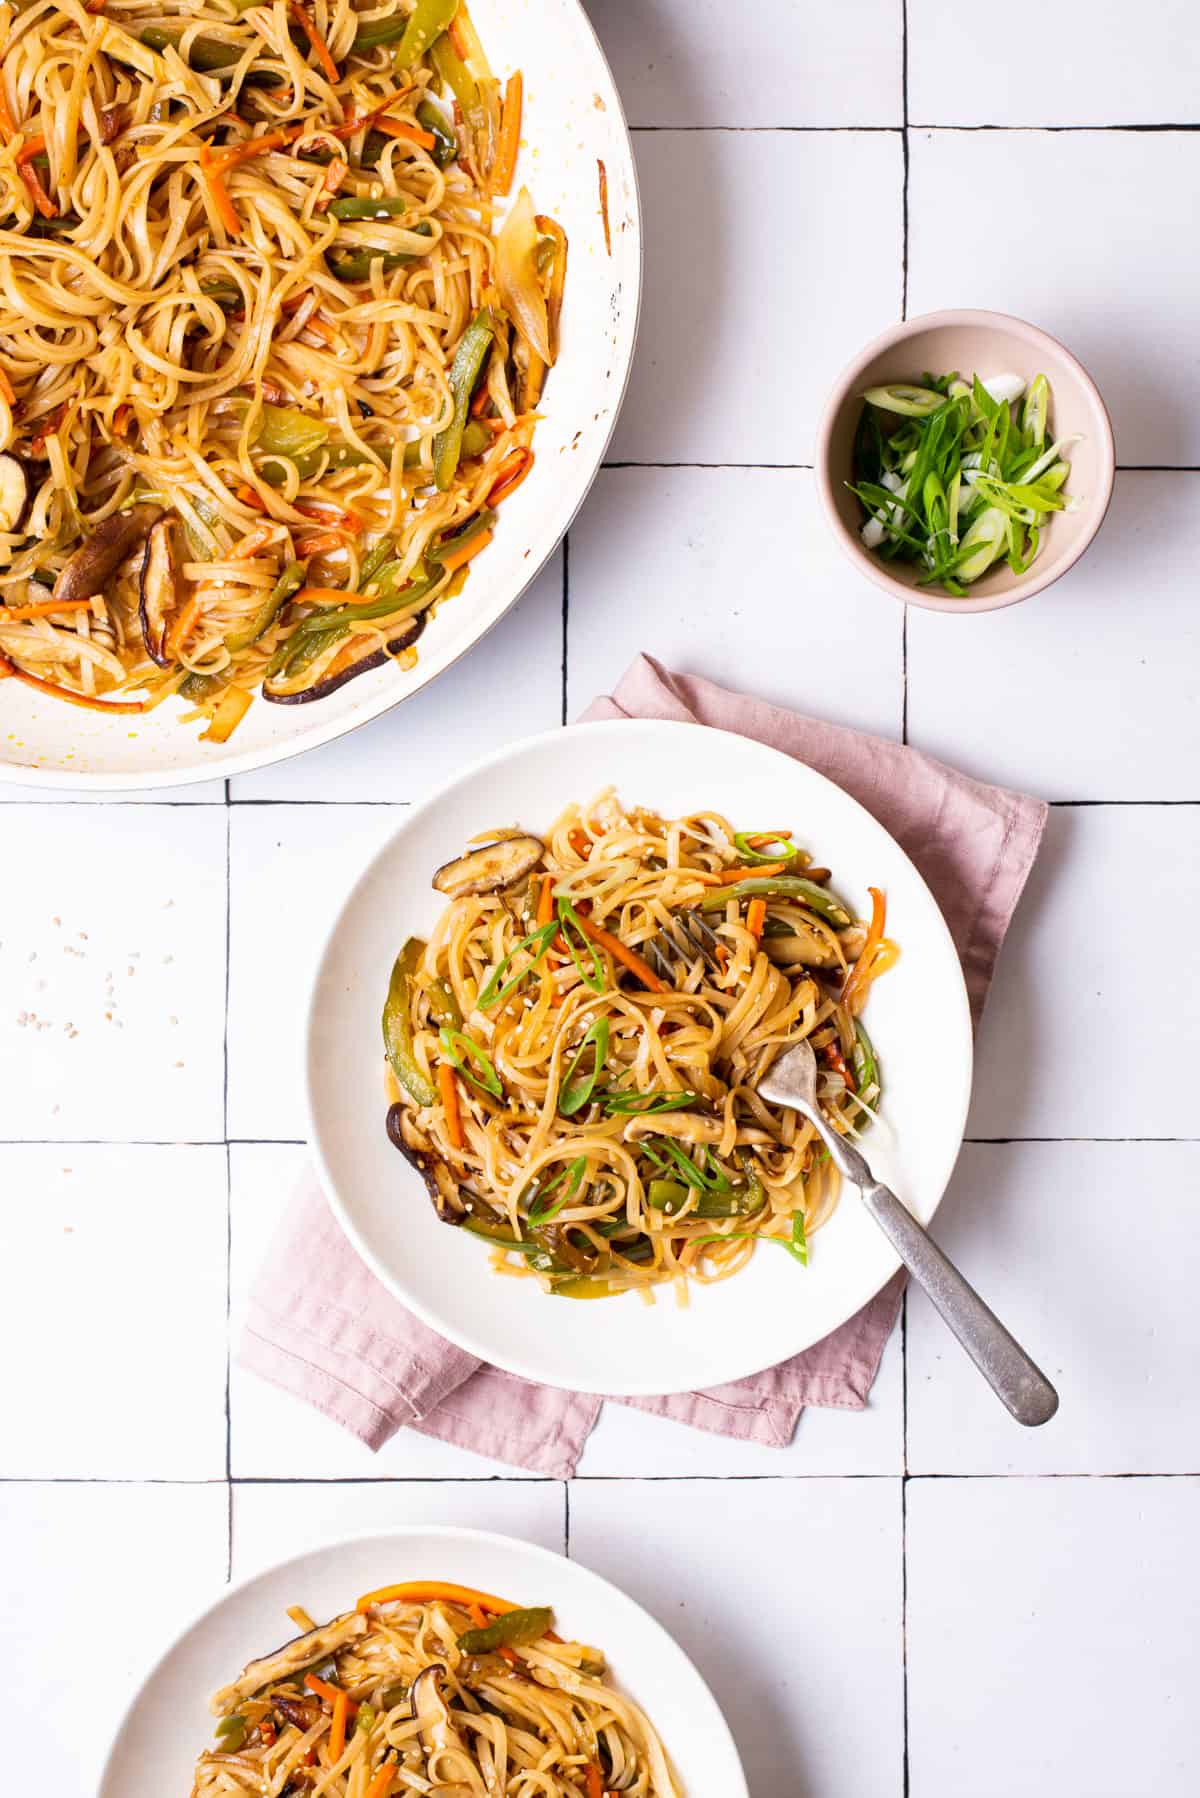 Bowl of stir fried noodles with vegetables next to sliced scallions.